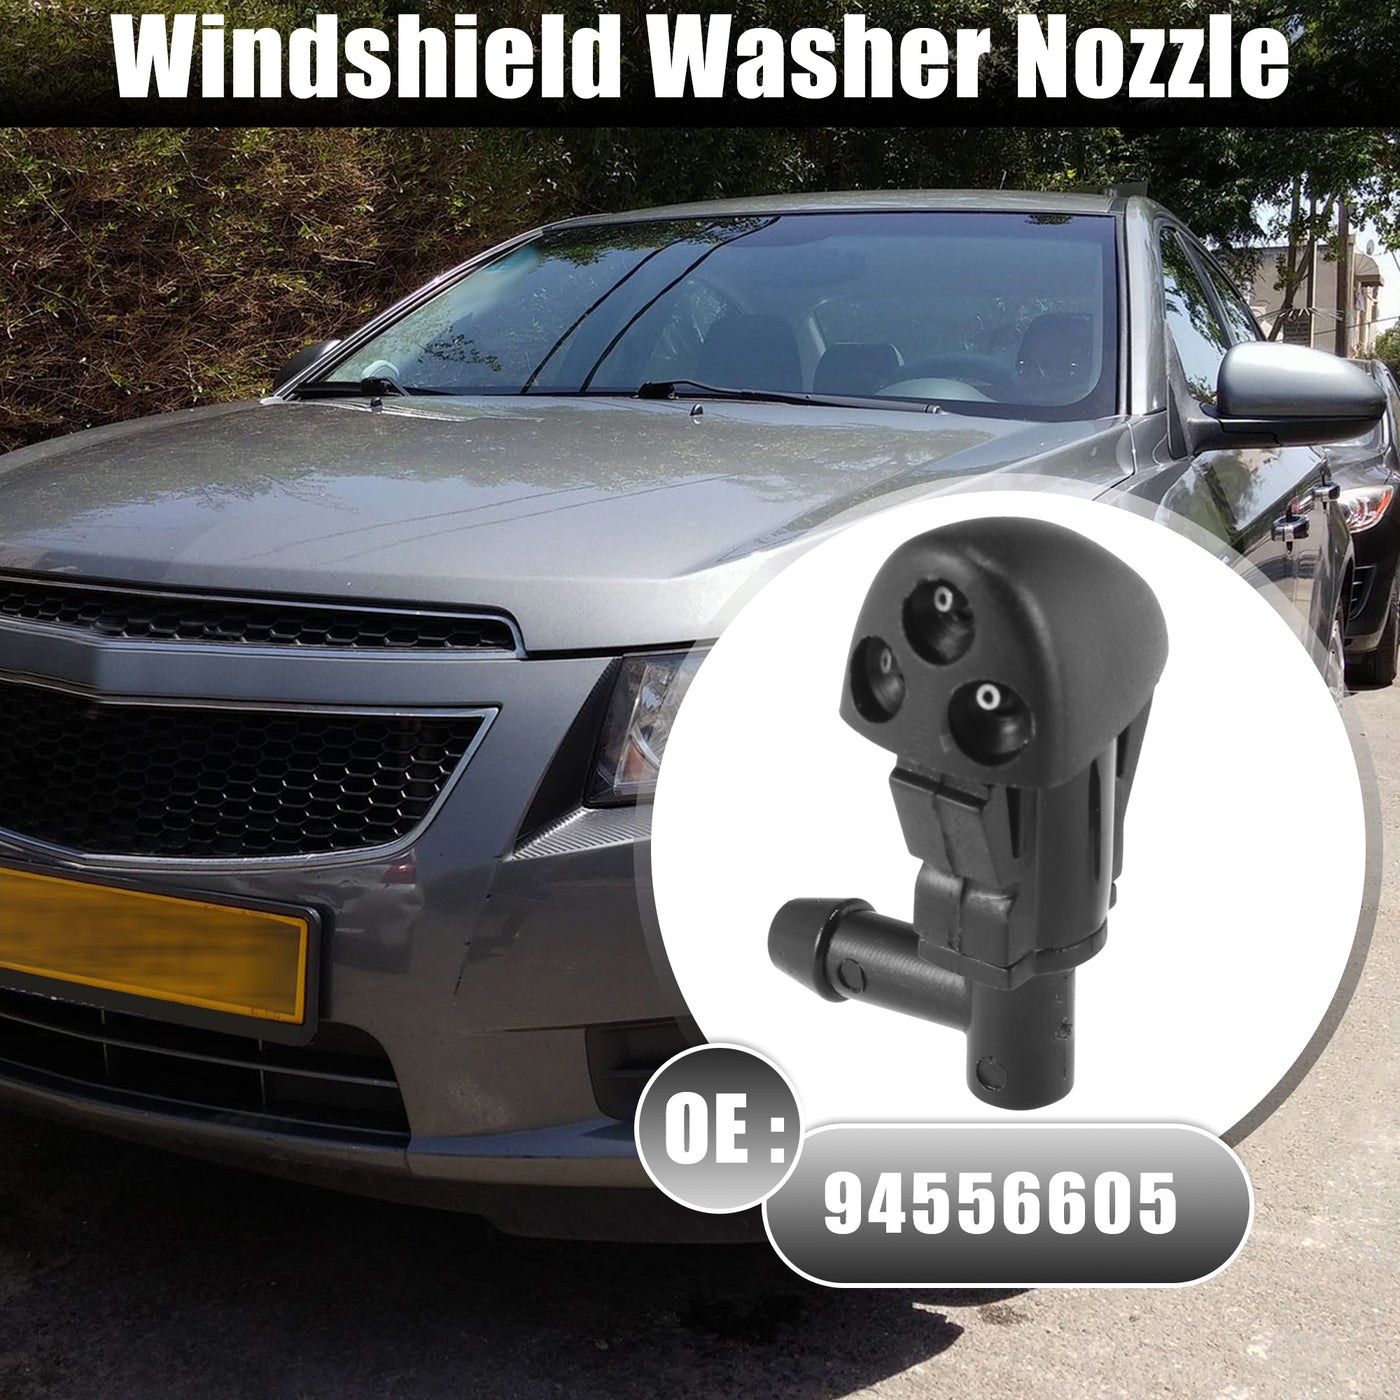 X AUTOHAUX Front Windshield Washer Nozzles Wiper Spray for Chevrolet Cruze 2009-2014 Replaces 94556605 2pcs